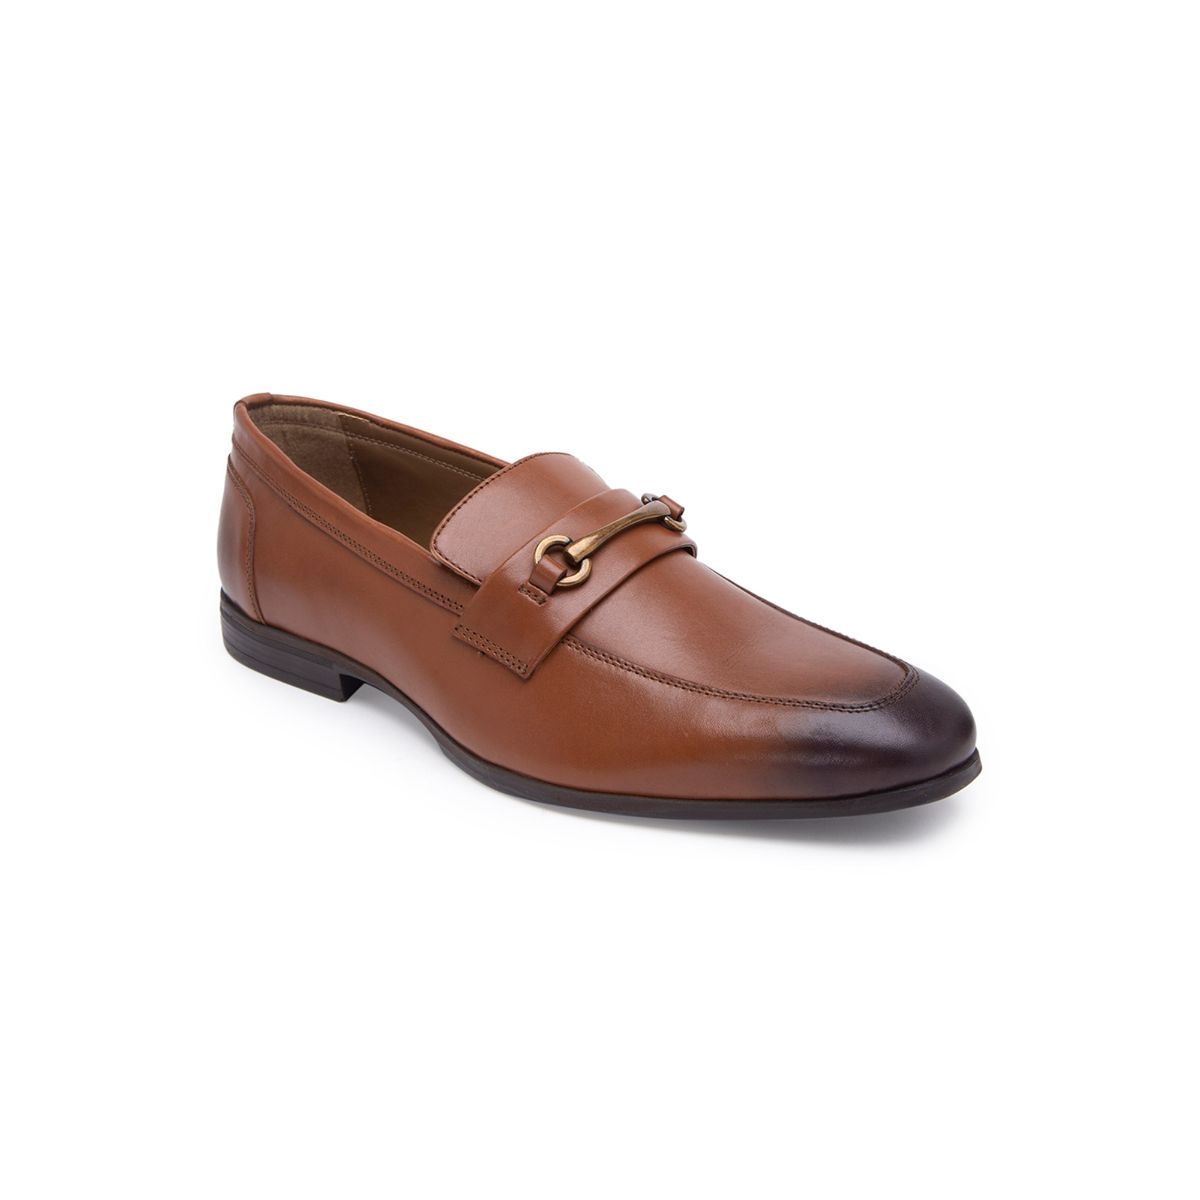 Allen Cooper Tan Leather Formal Shoes - 7